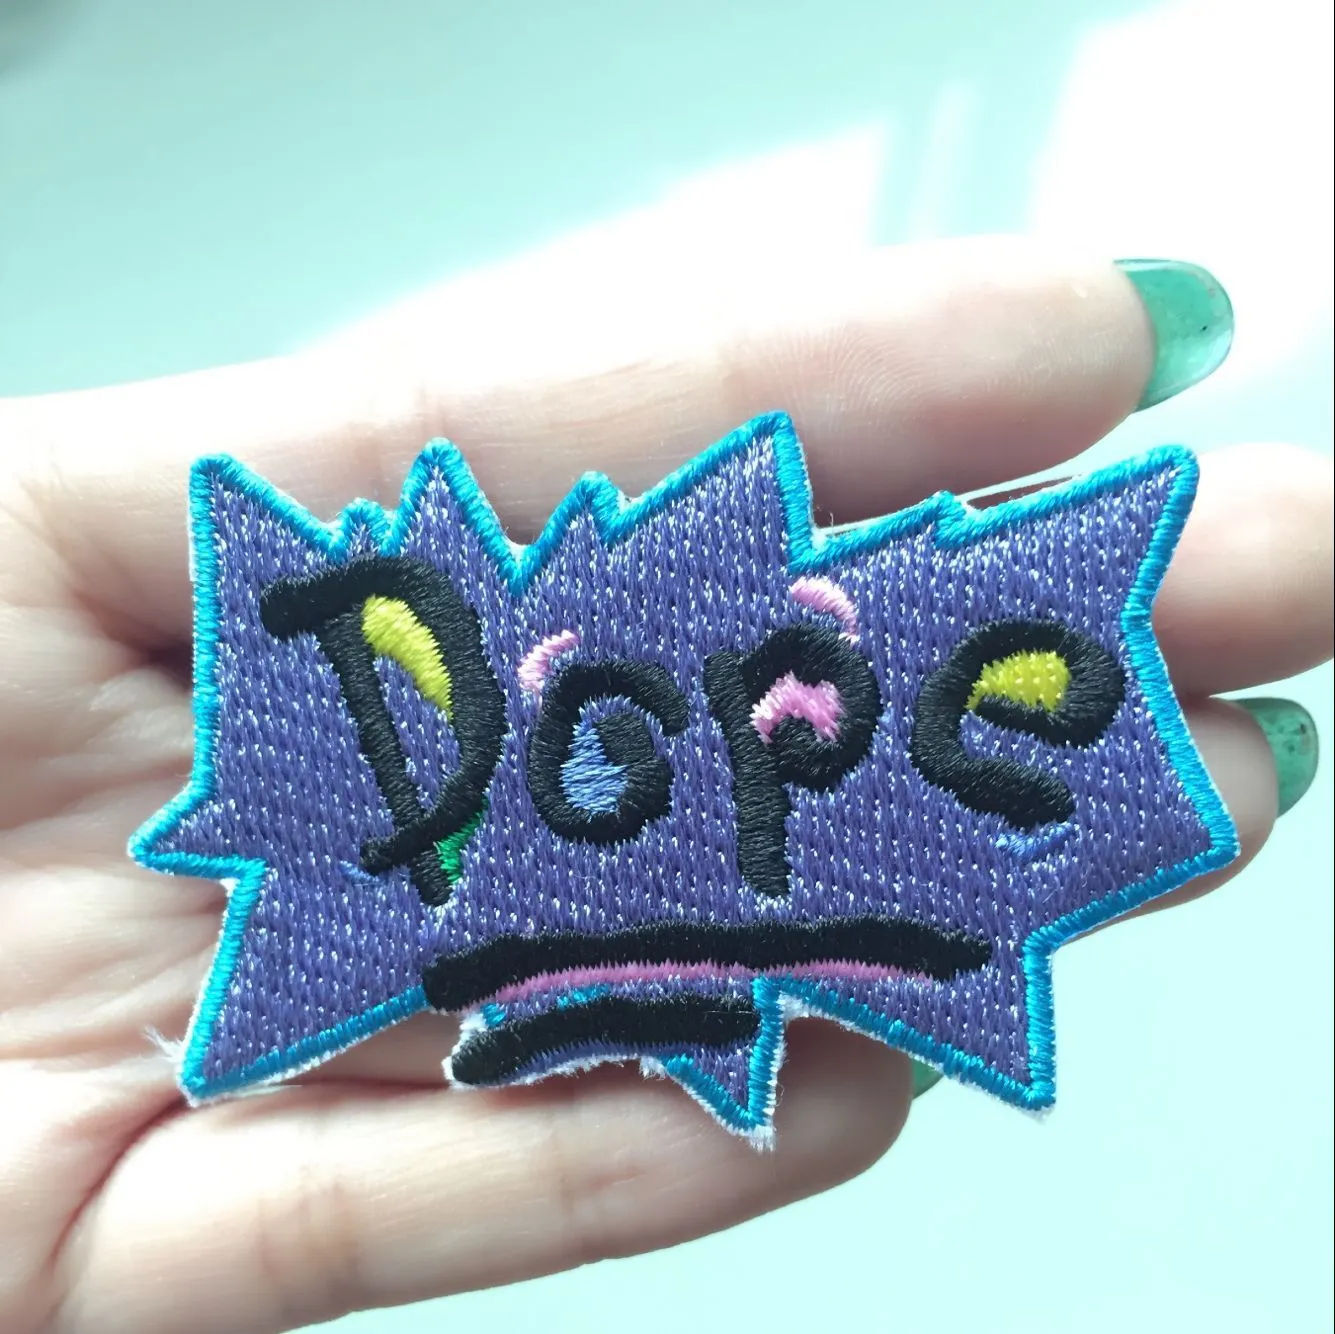 Green's House POP WOW Embroidered Iron-On Patch KID Cute Applique Clothing Accessory Badge Shirts Cartoon Stitch Patch S329K